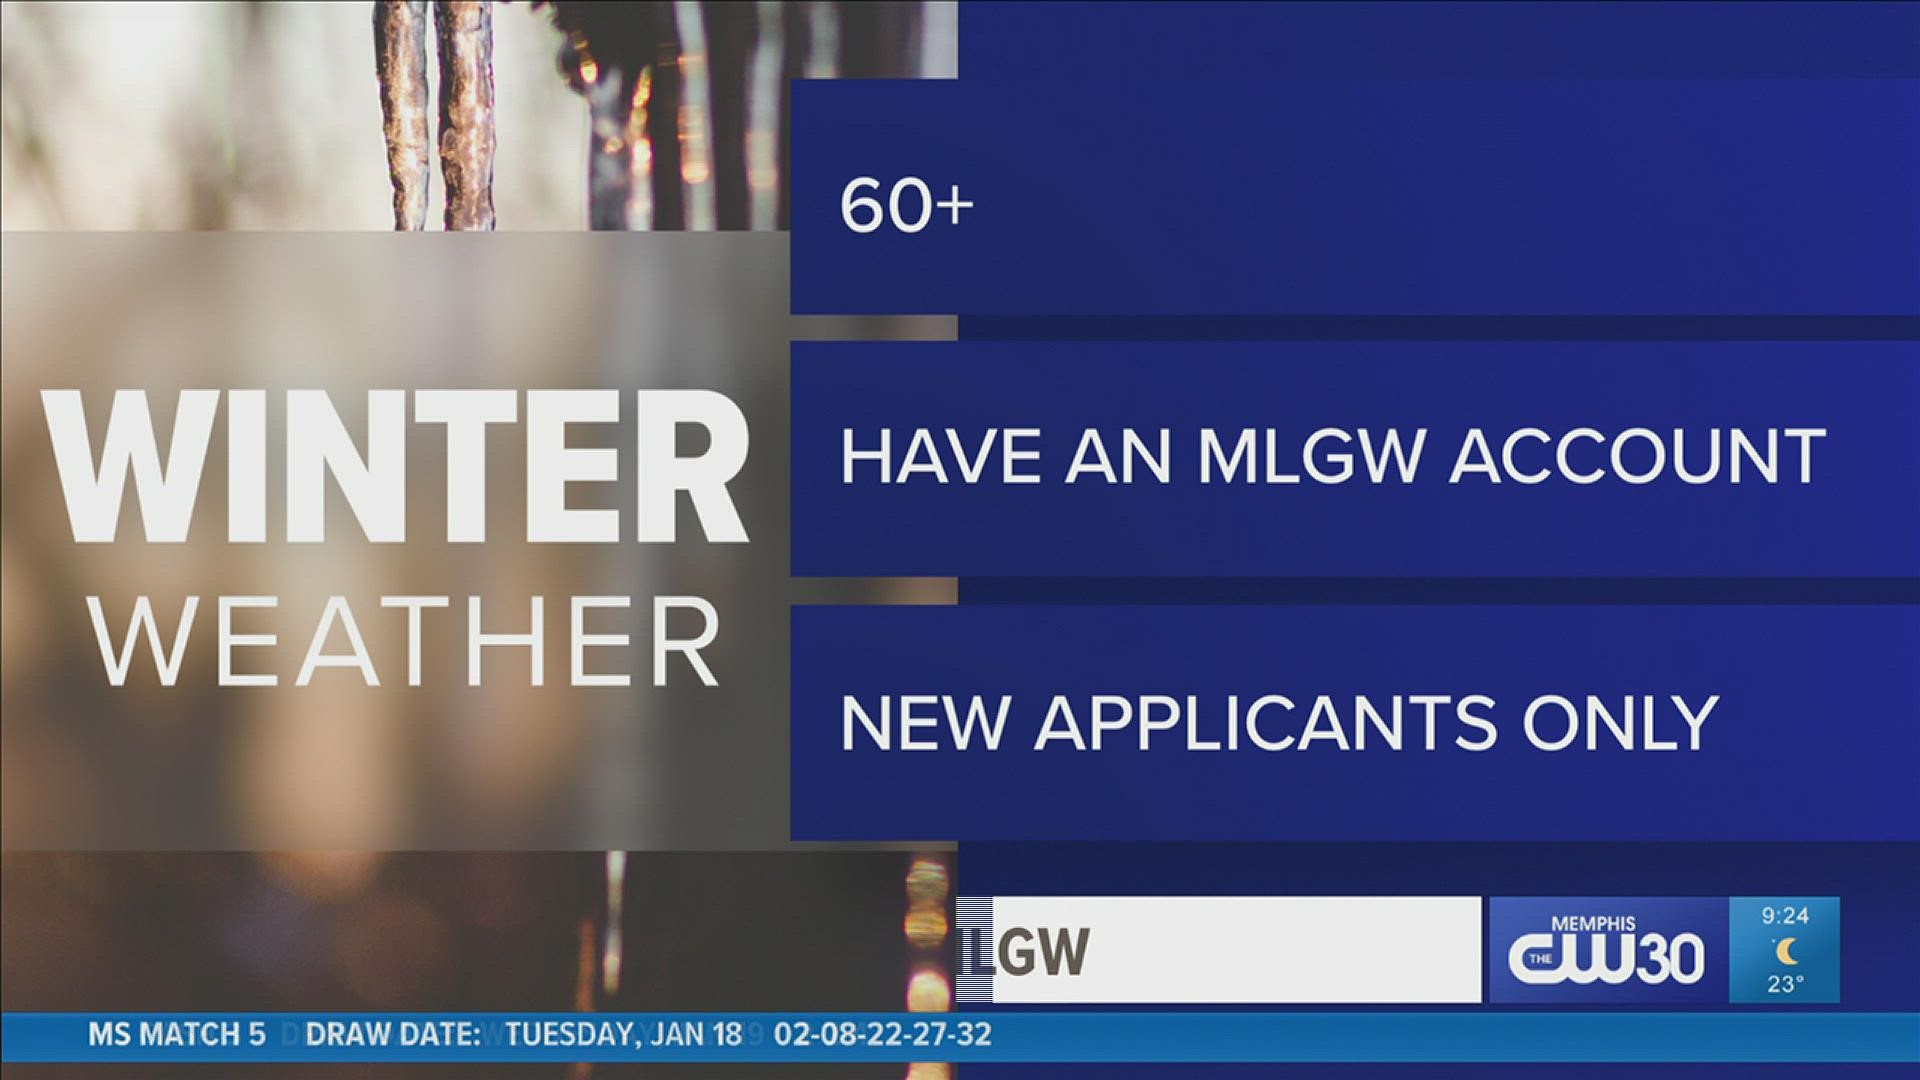 Applications are now being accepted online only for MLGW's Power of Warmth program.